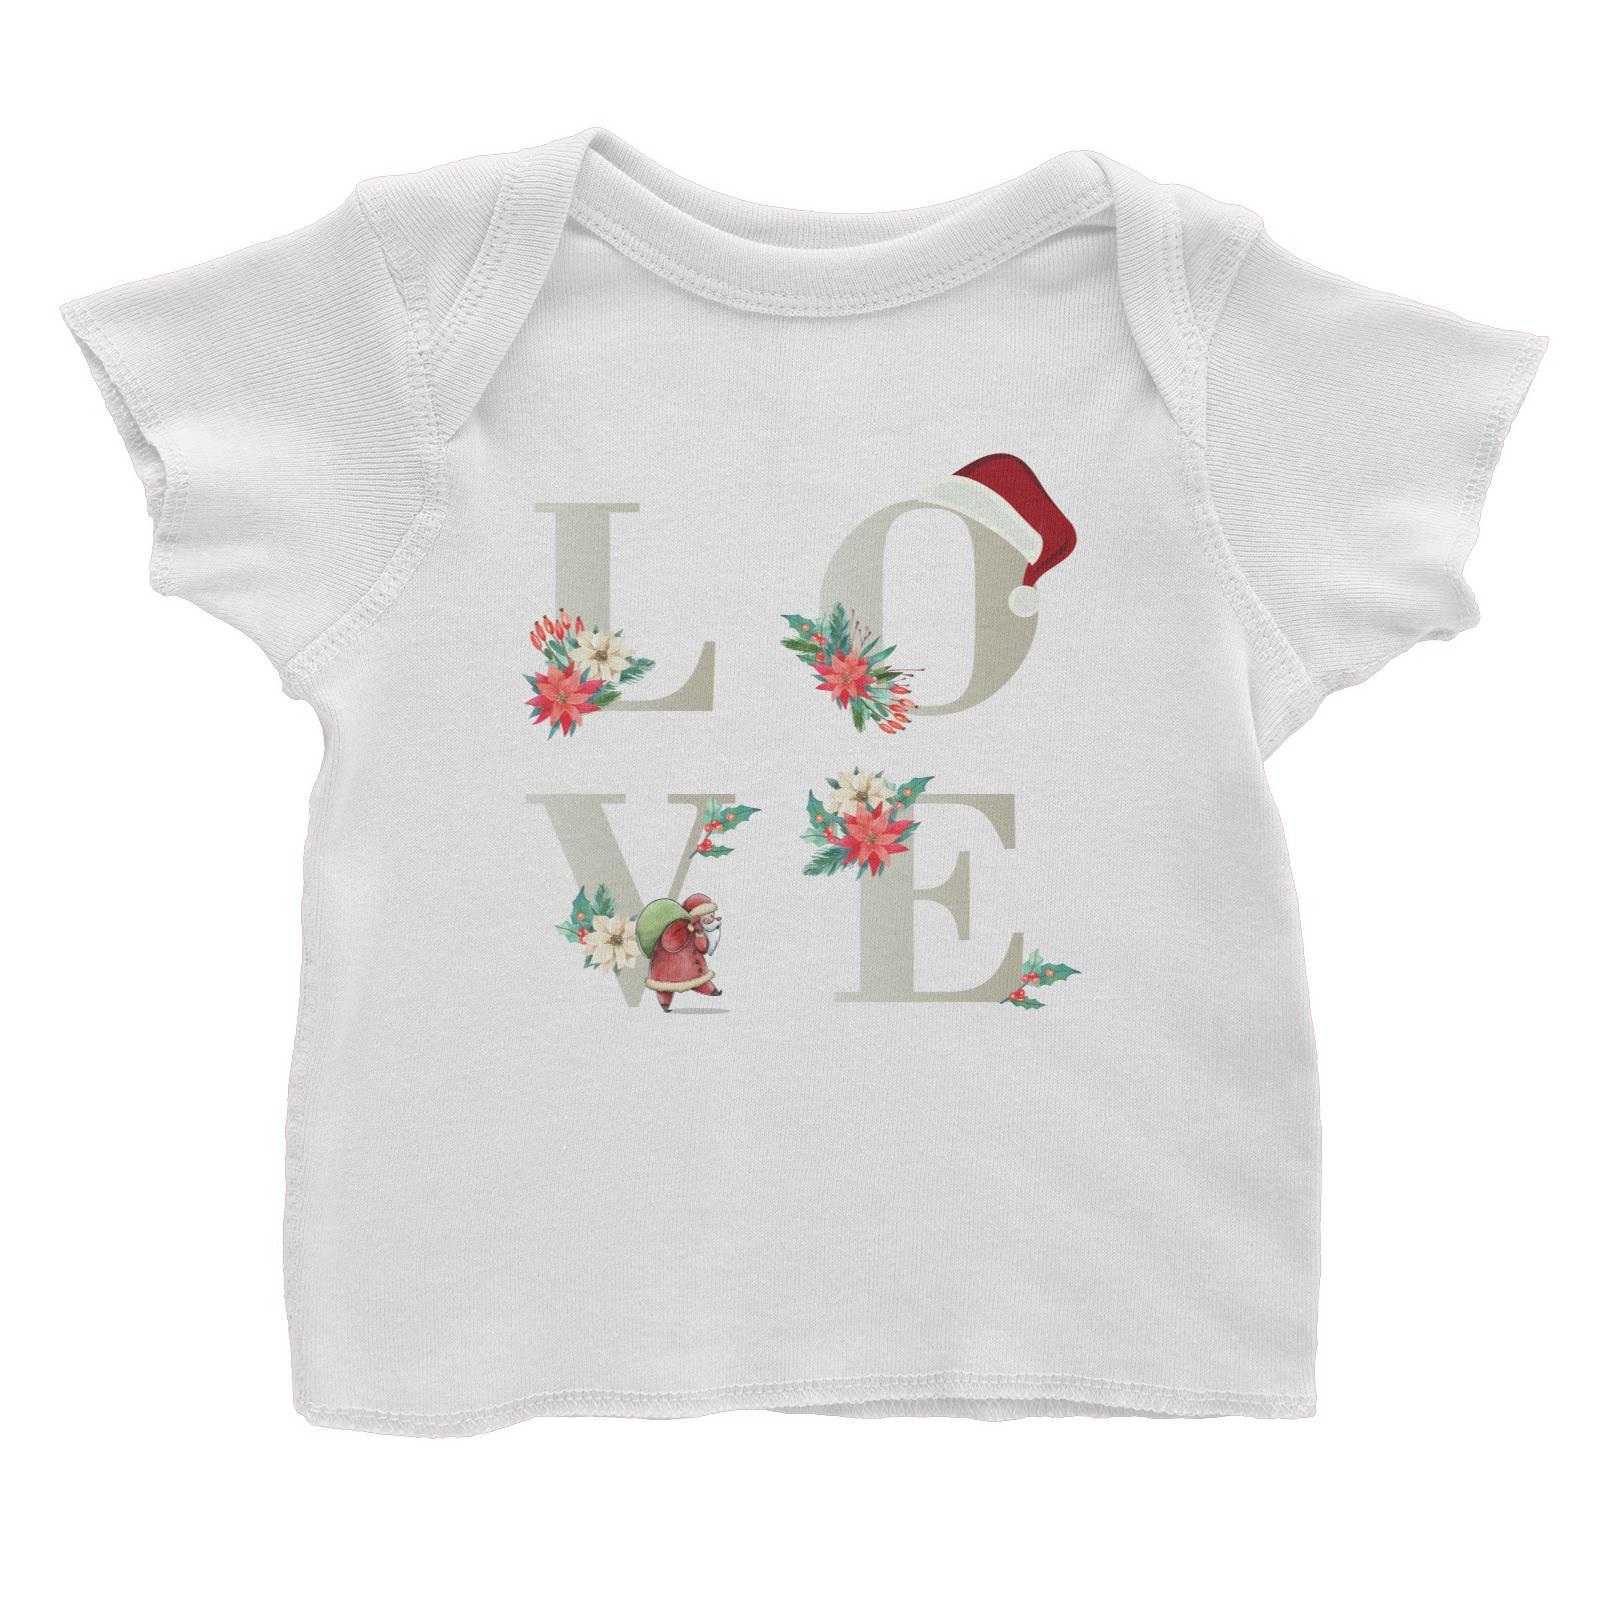 LOVE with Christmas Elements Baby T-Shirt